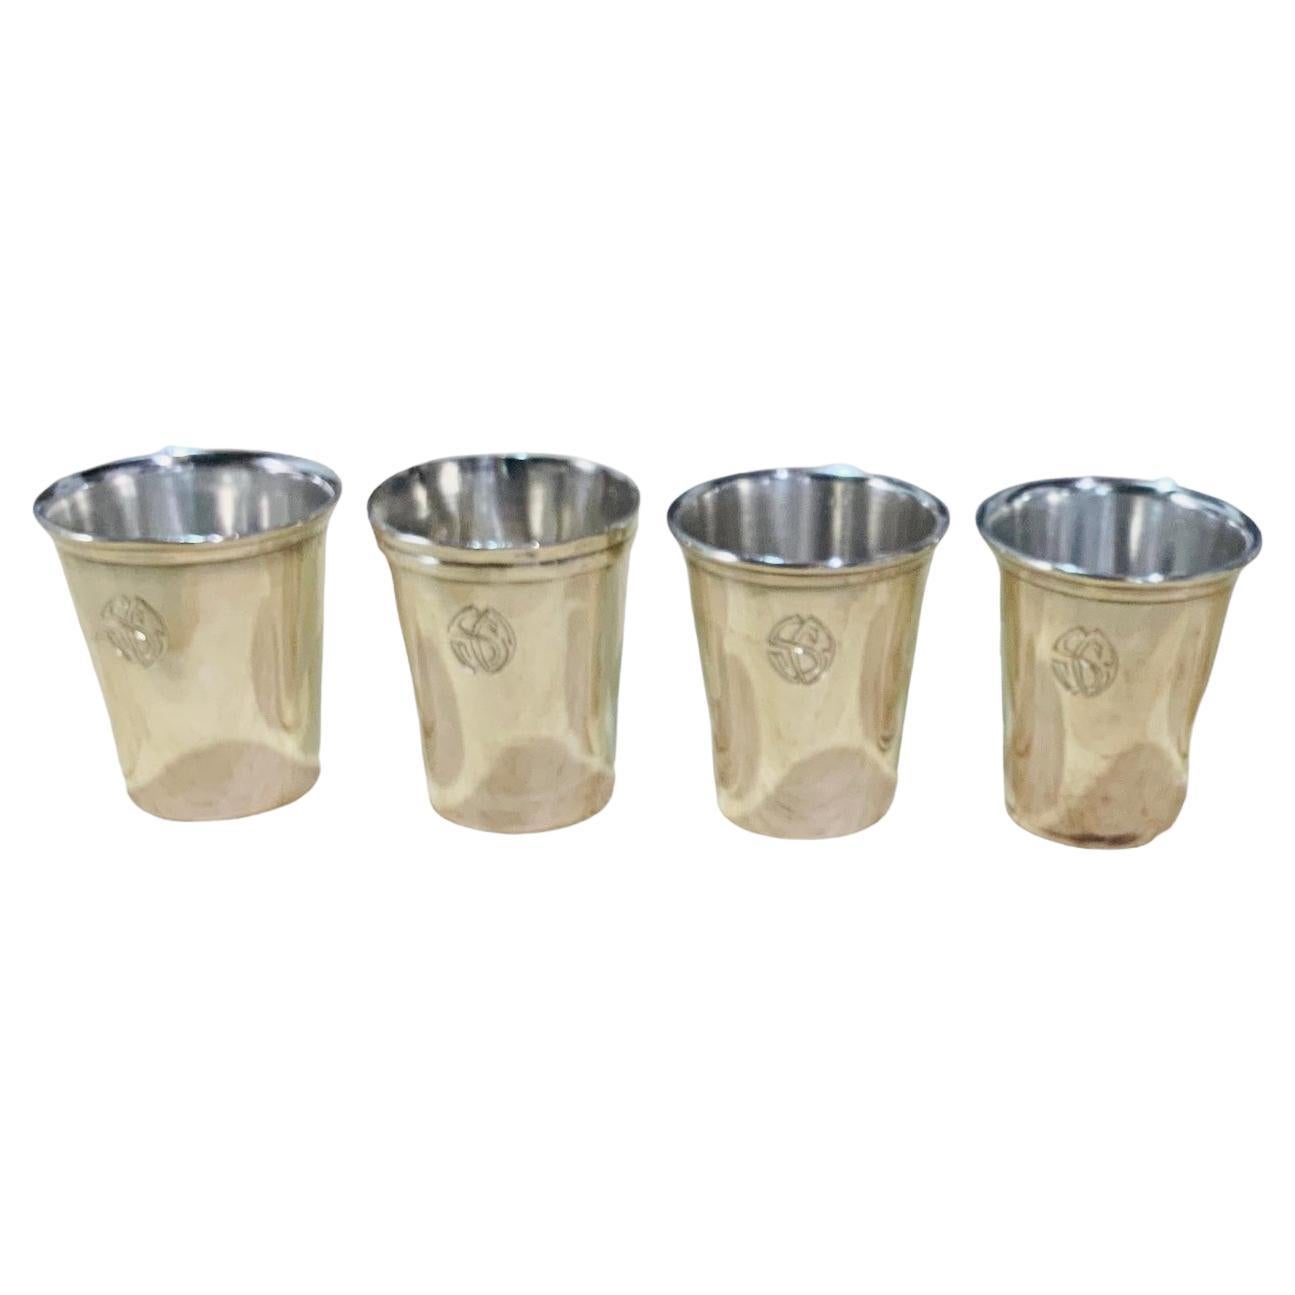 This is a Spaniard Set of Four Silver Shot Glasses. They are engraved with a Monograms of the letters “S” and “O” in the front. Their rim is adorned with ribbed borders. At the base is hallmarked Casa Pomar, 916/1000 (Silver purity).